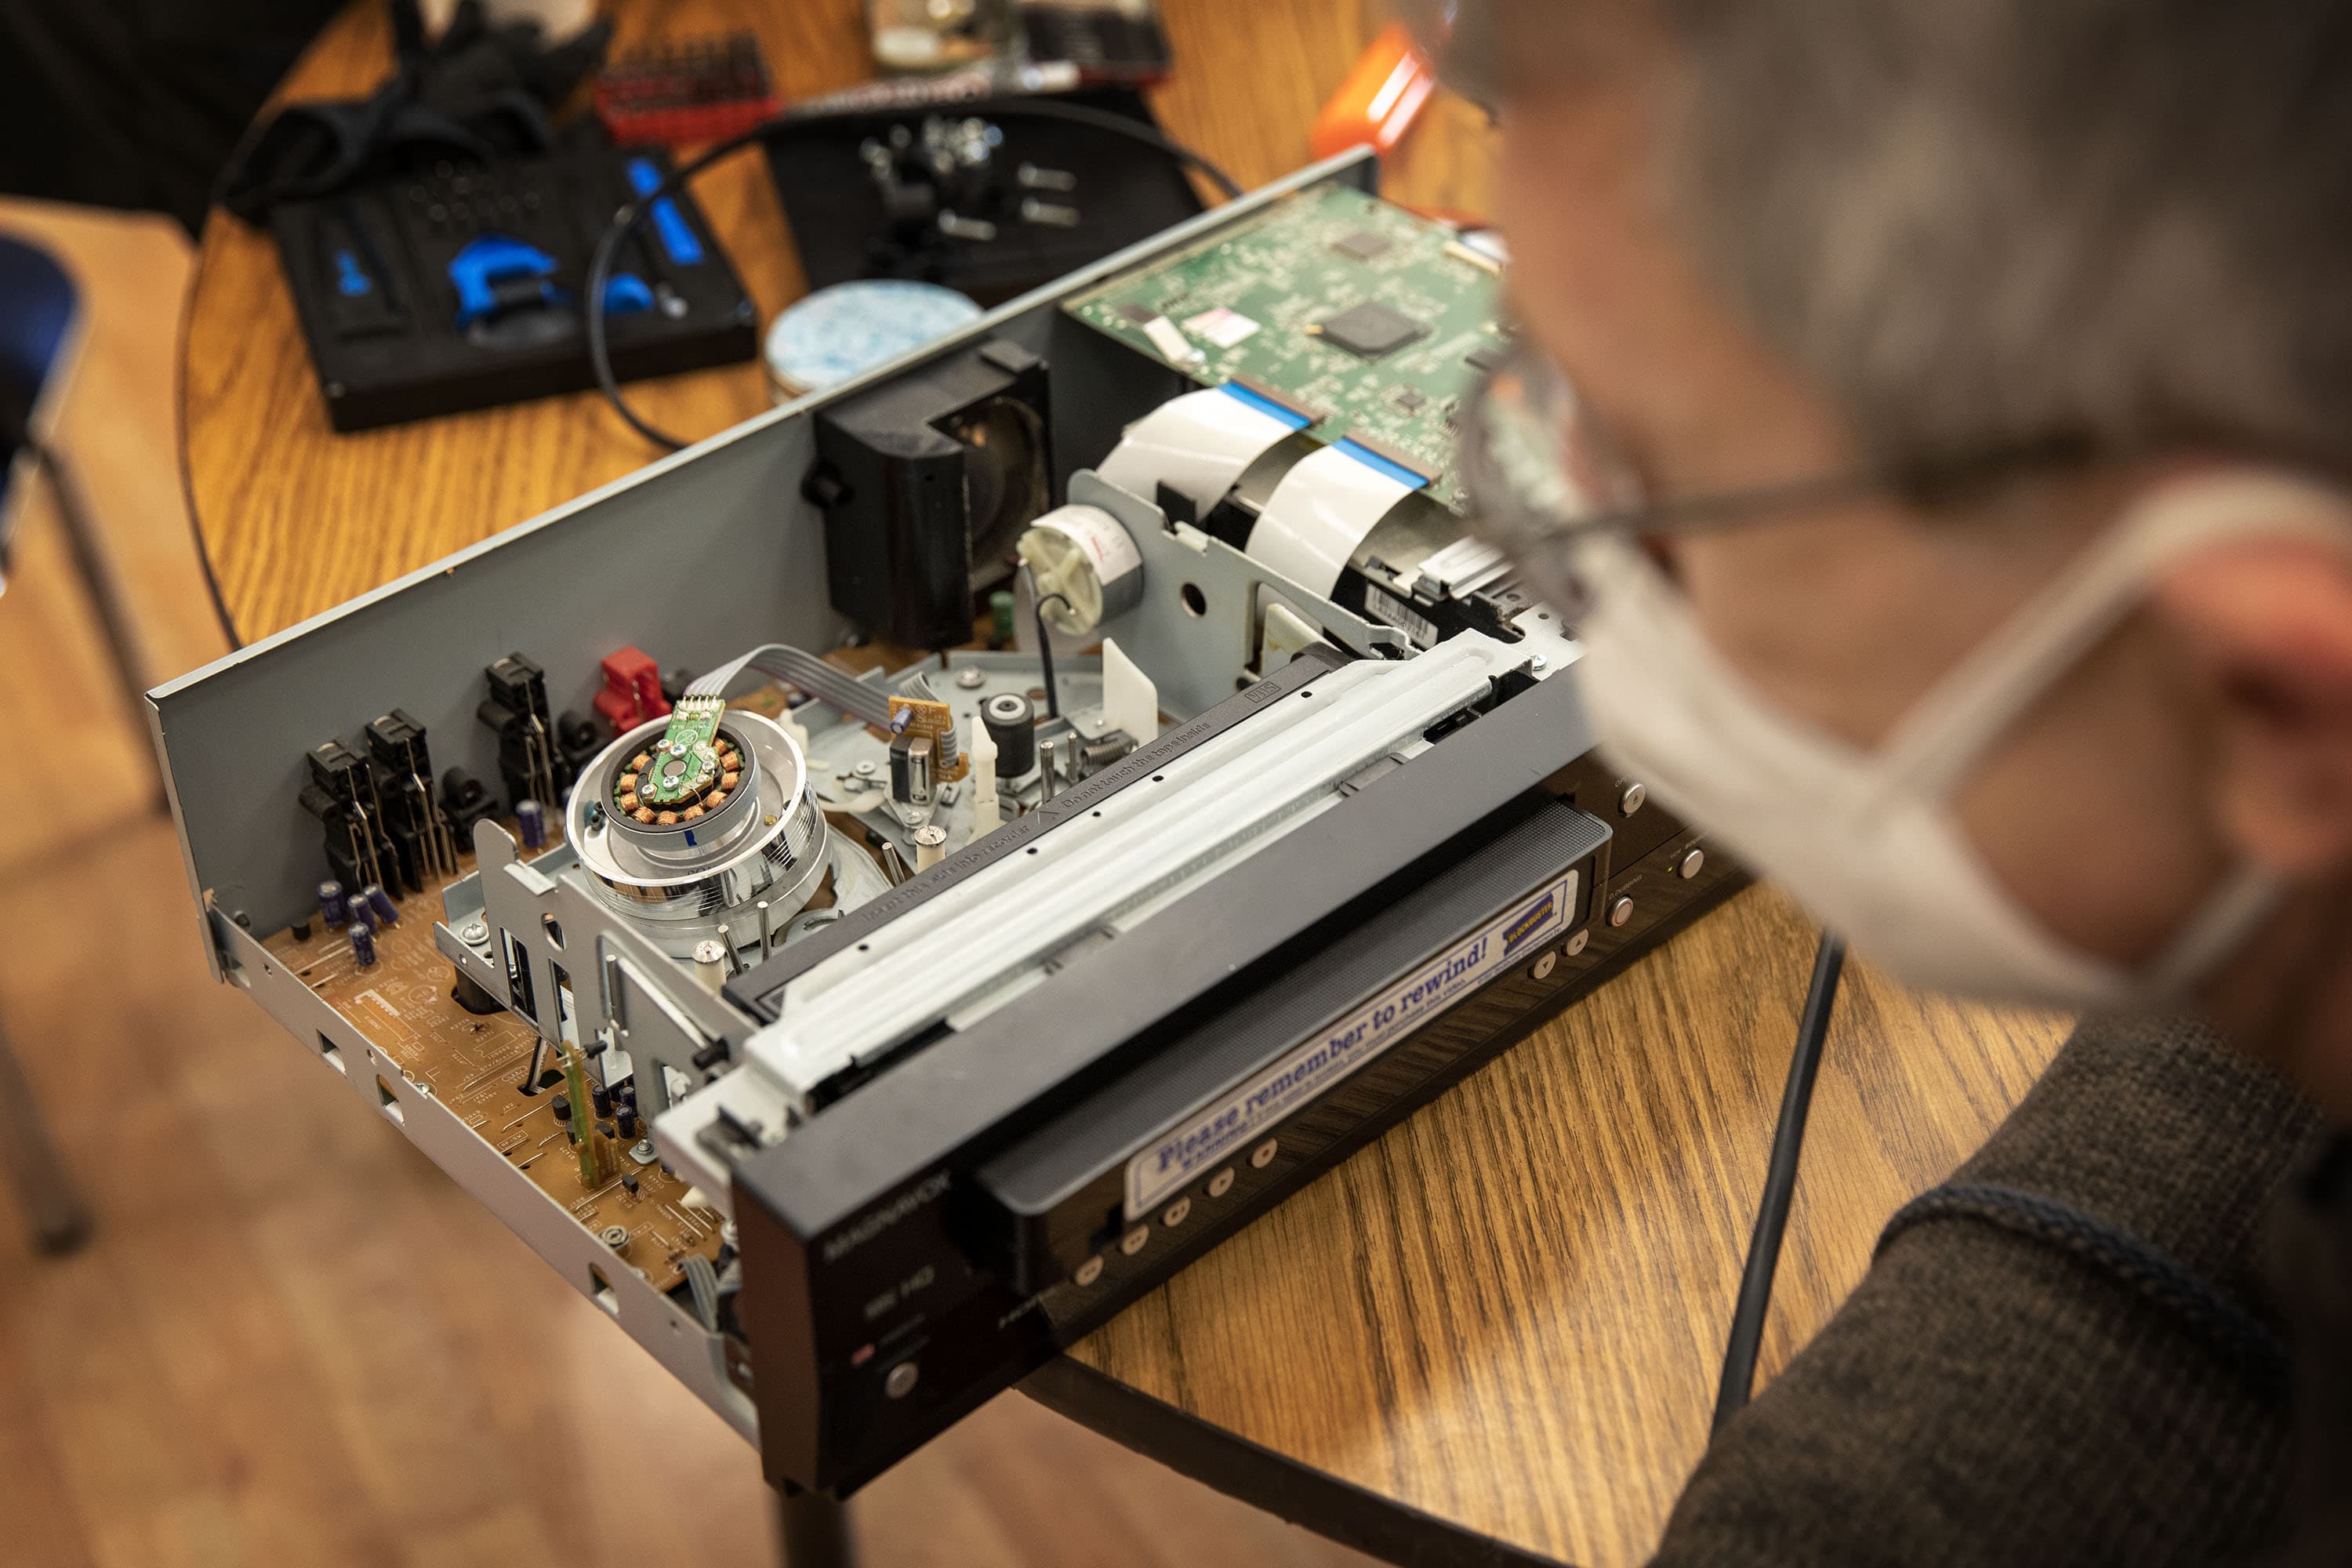 On the electronics table at the Repair Cafe, Justin Goding examines the inside of VHS video cassette machine. (Robin Lubbock/WBUR)